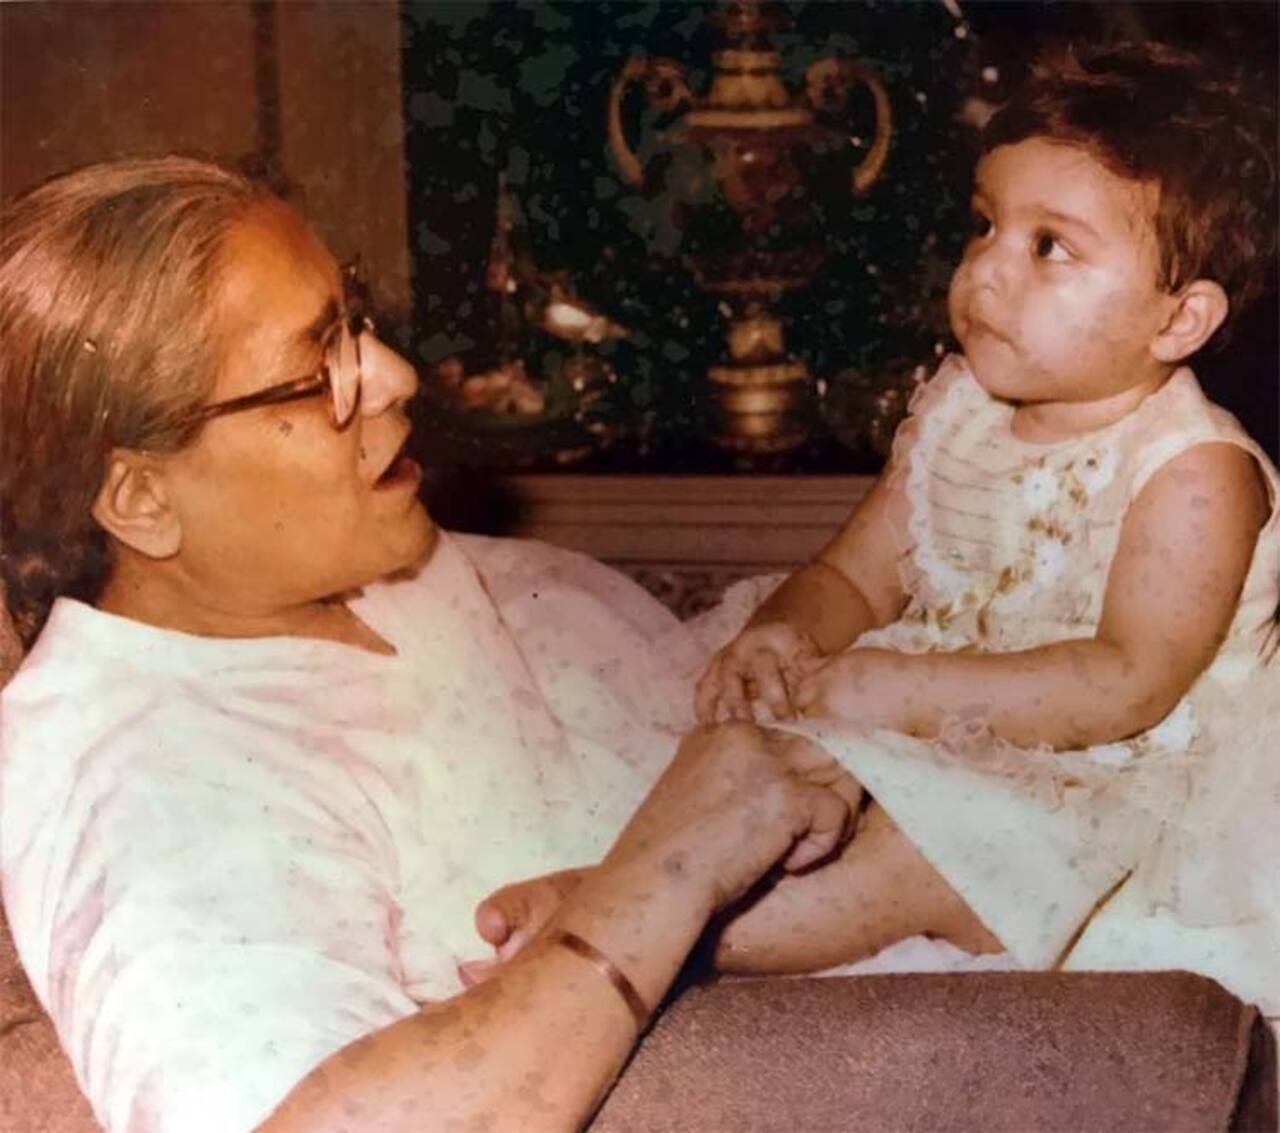 Soha Ali Khan took to Instagram to post a heartwarming photo of her story session with her grandmother. 